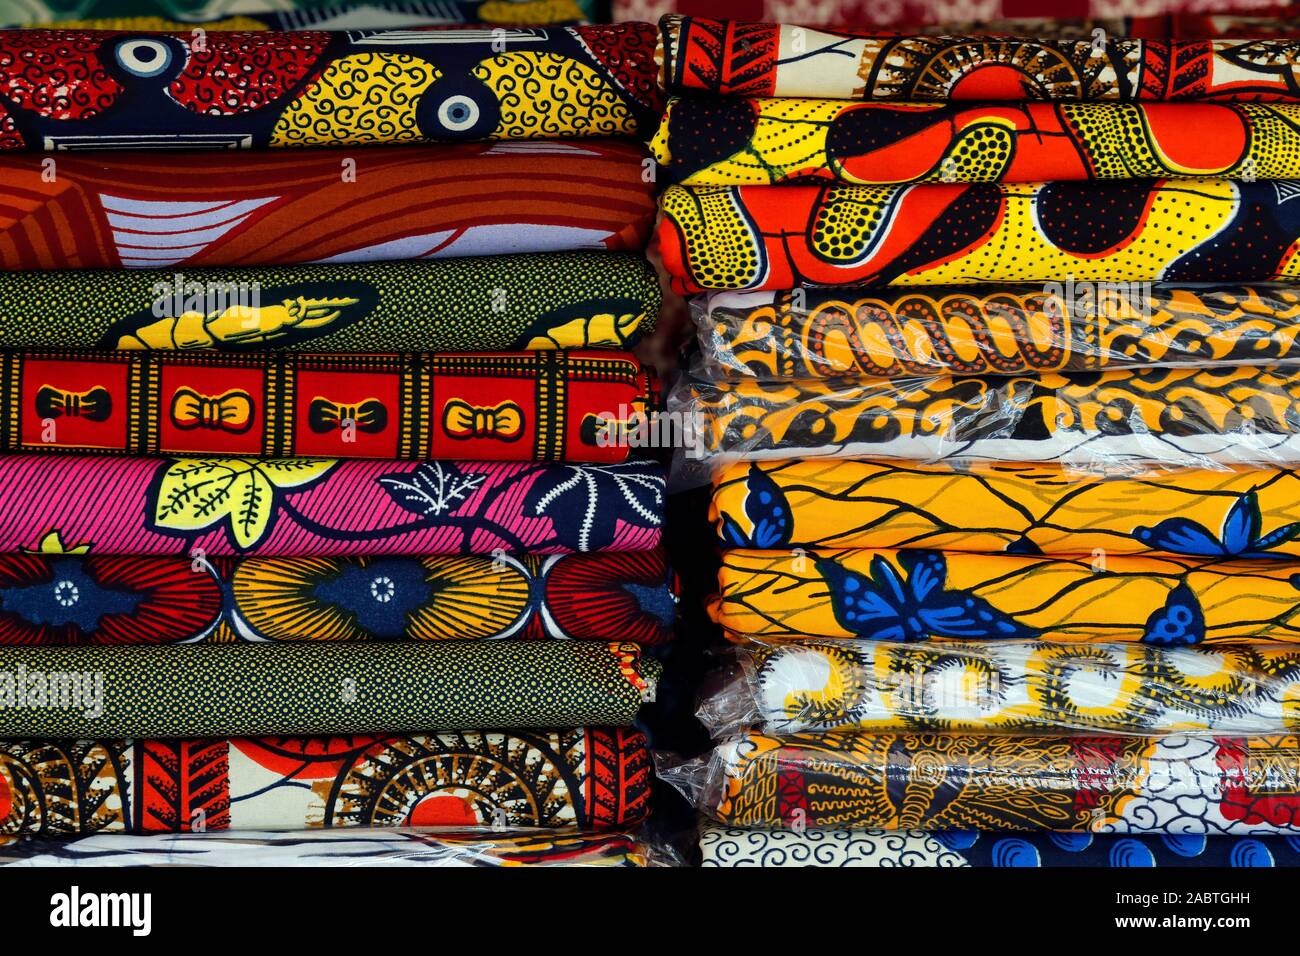 Imported dutch wax print fabric for traditional african dress.  Lome. Togo. Stock Photo